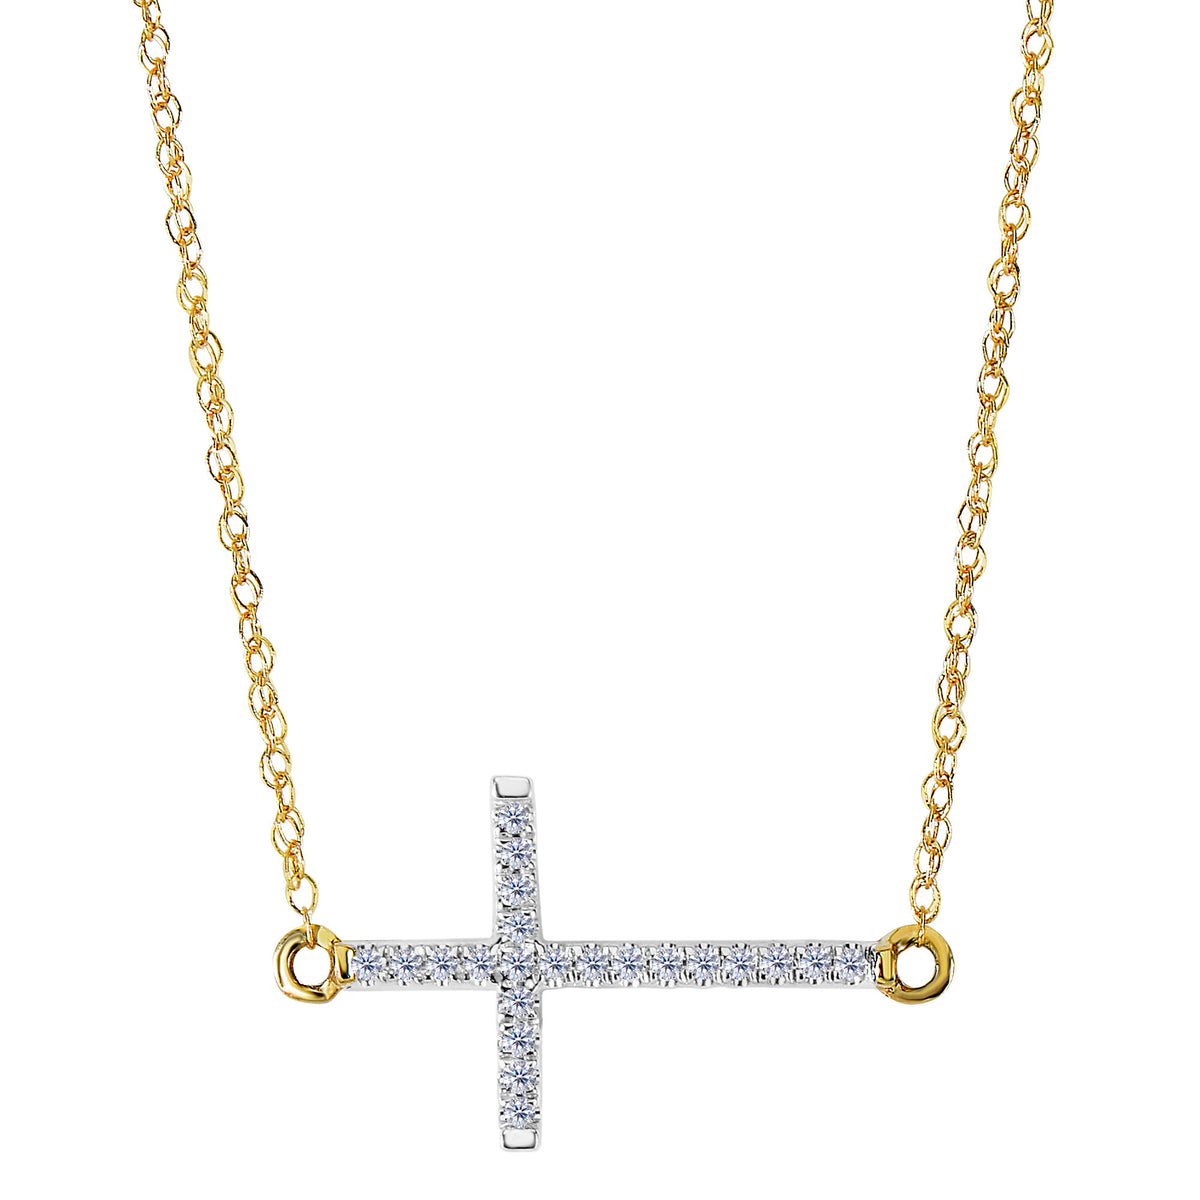 14k Yellow Gold With 0.05ct Diamonds Side Ways Cross Necklace - 18 Inches - JewelryAffairs
 - 1